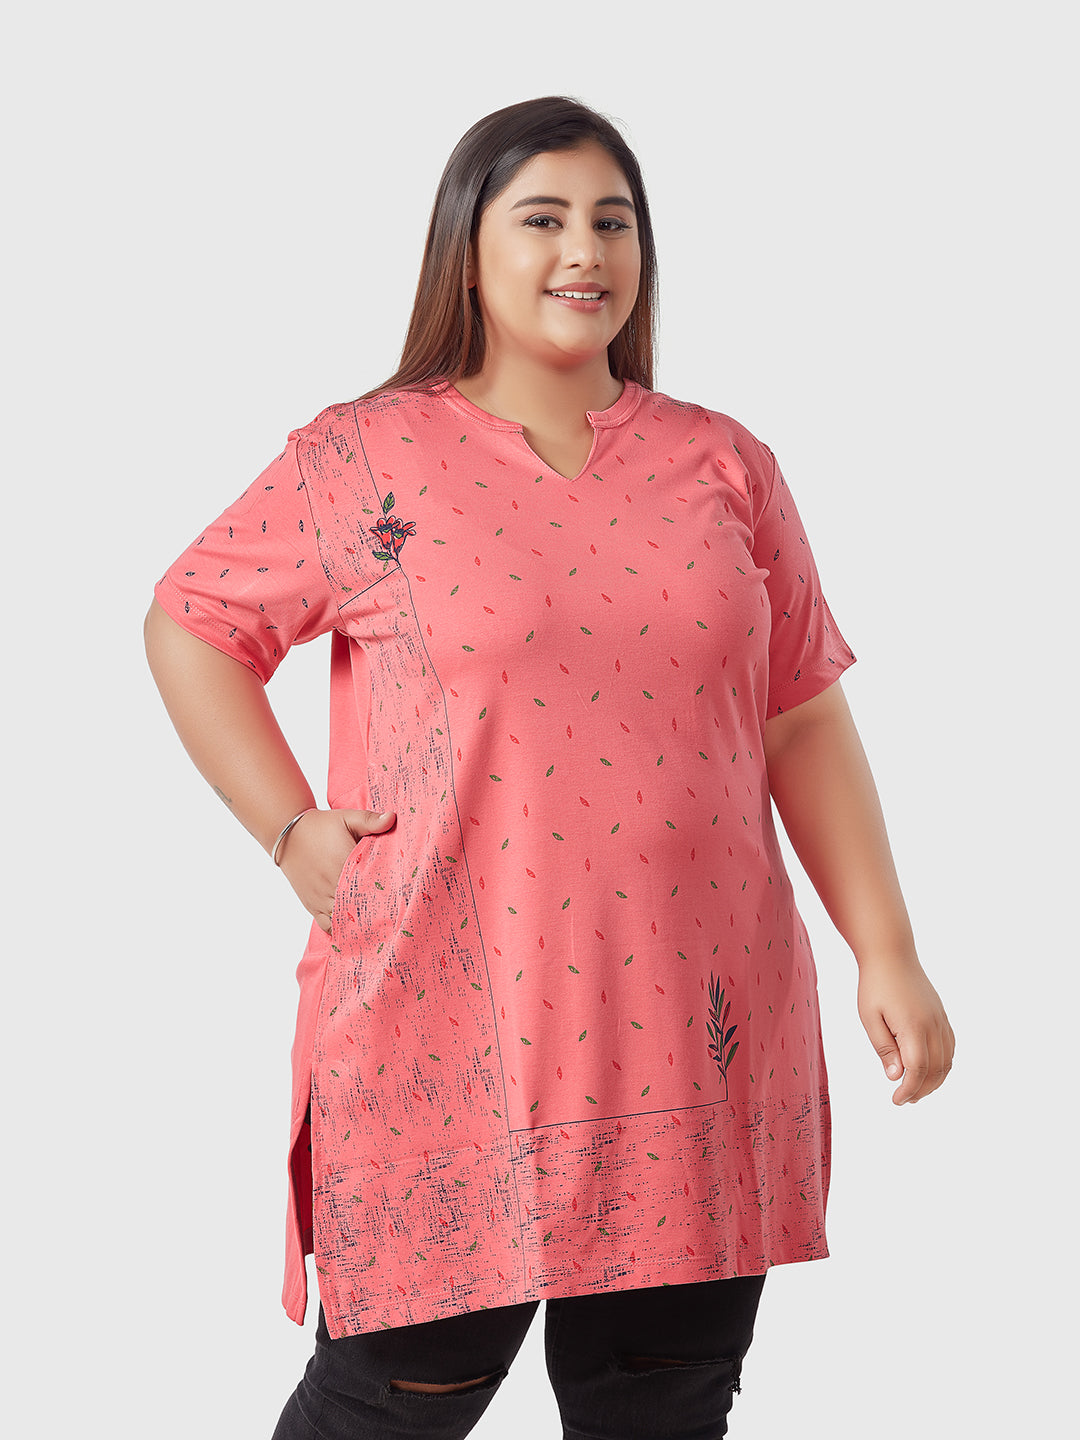 Plus Size Printed Long Tops For Women Cotton Half Sleeves - Pink